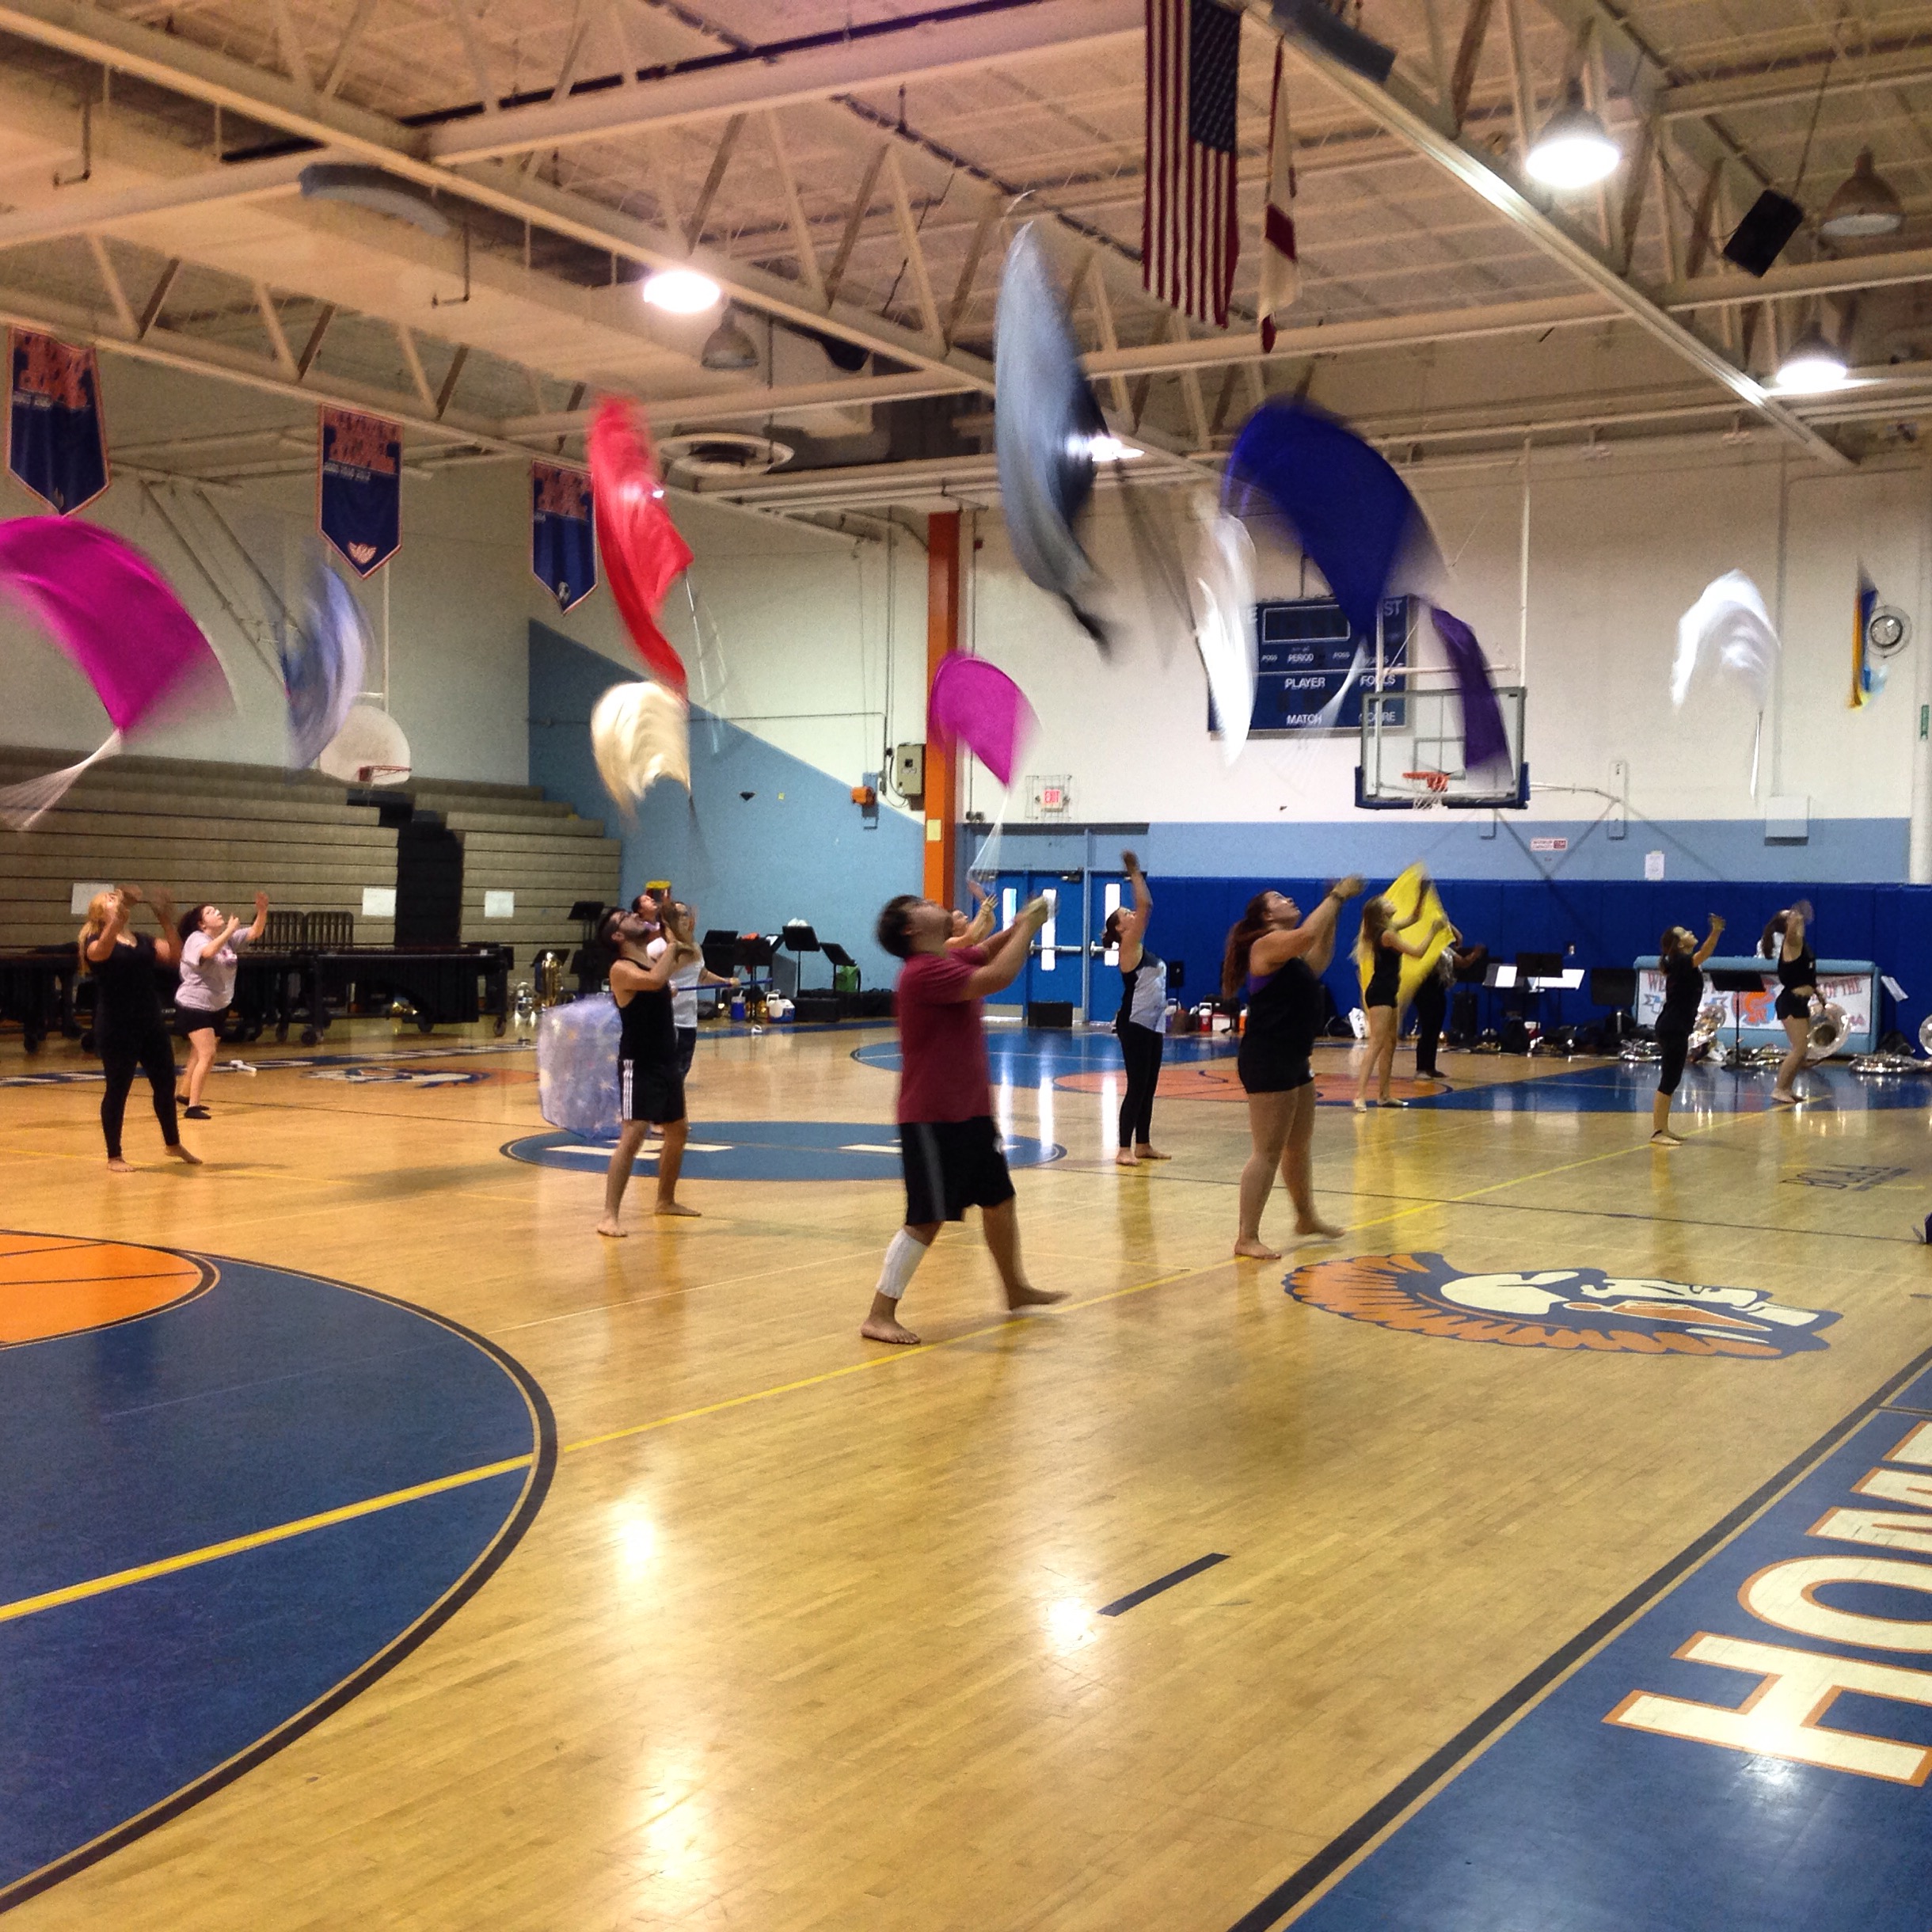 Colorguard started off 'Show and Tell' with their production they created that day!